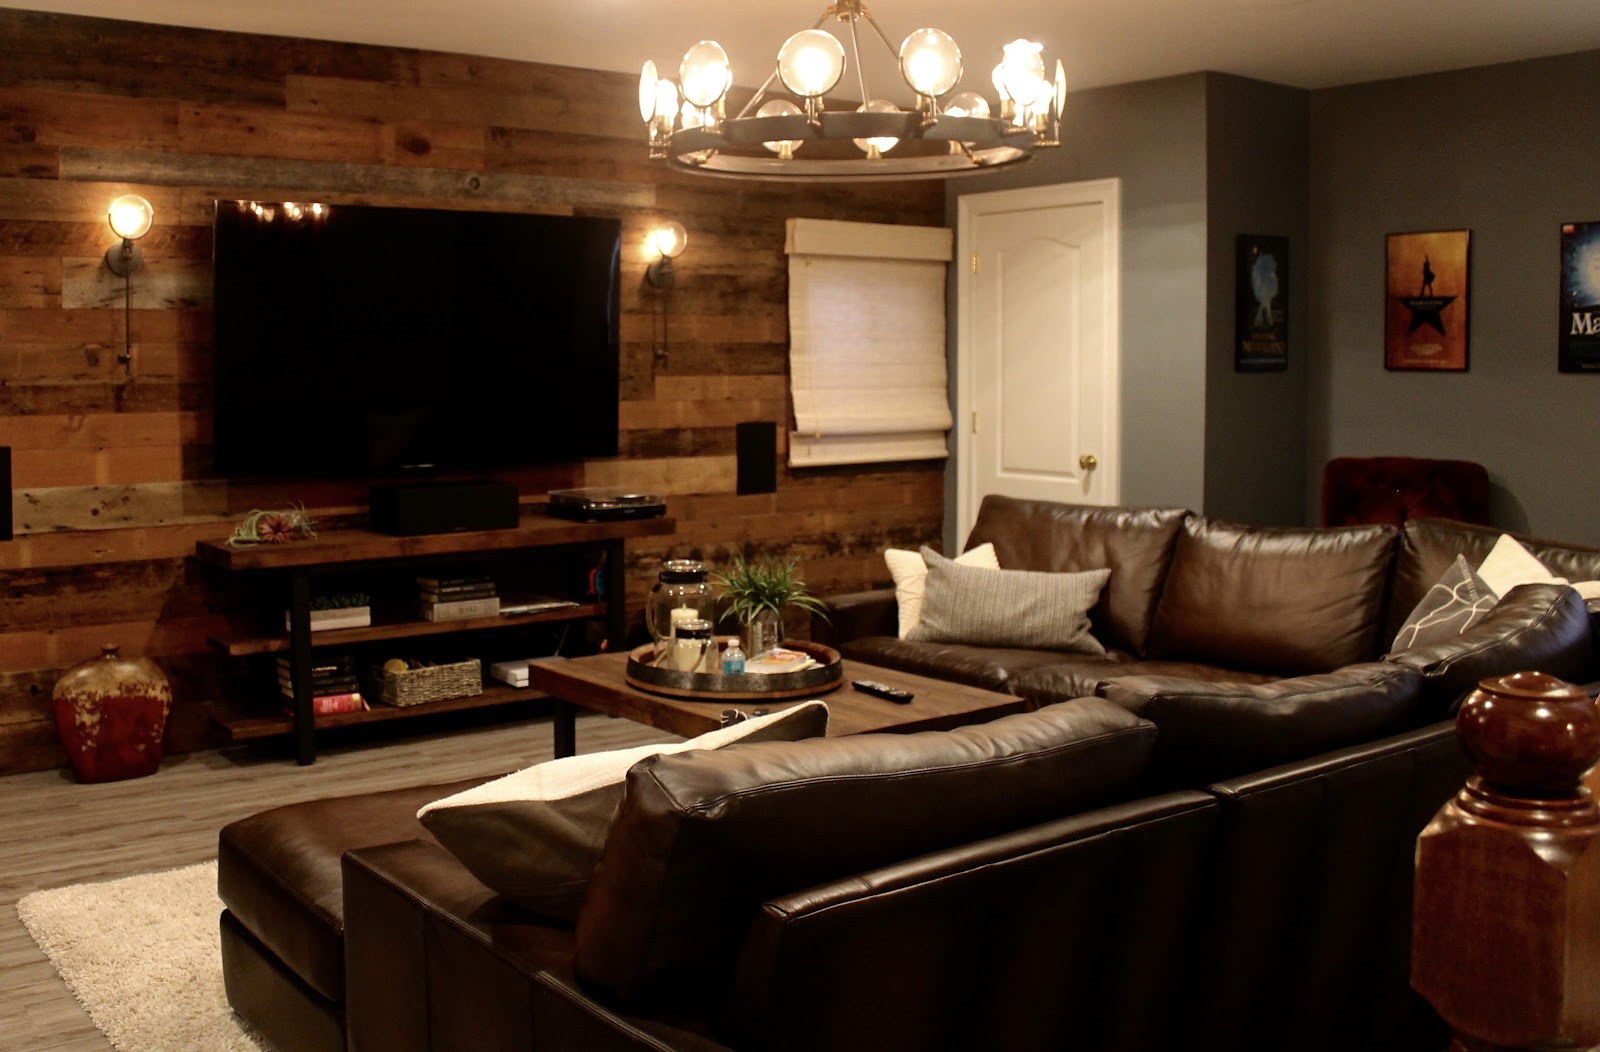 Basement media space with reclaimed wood walls, modern vintage chandelier, and leather couch.